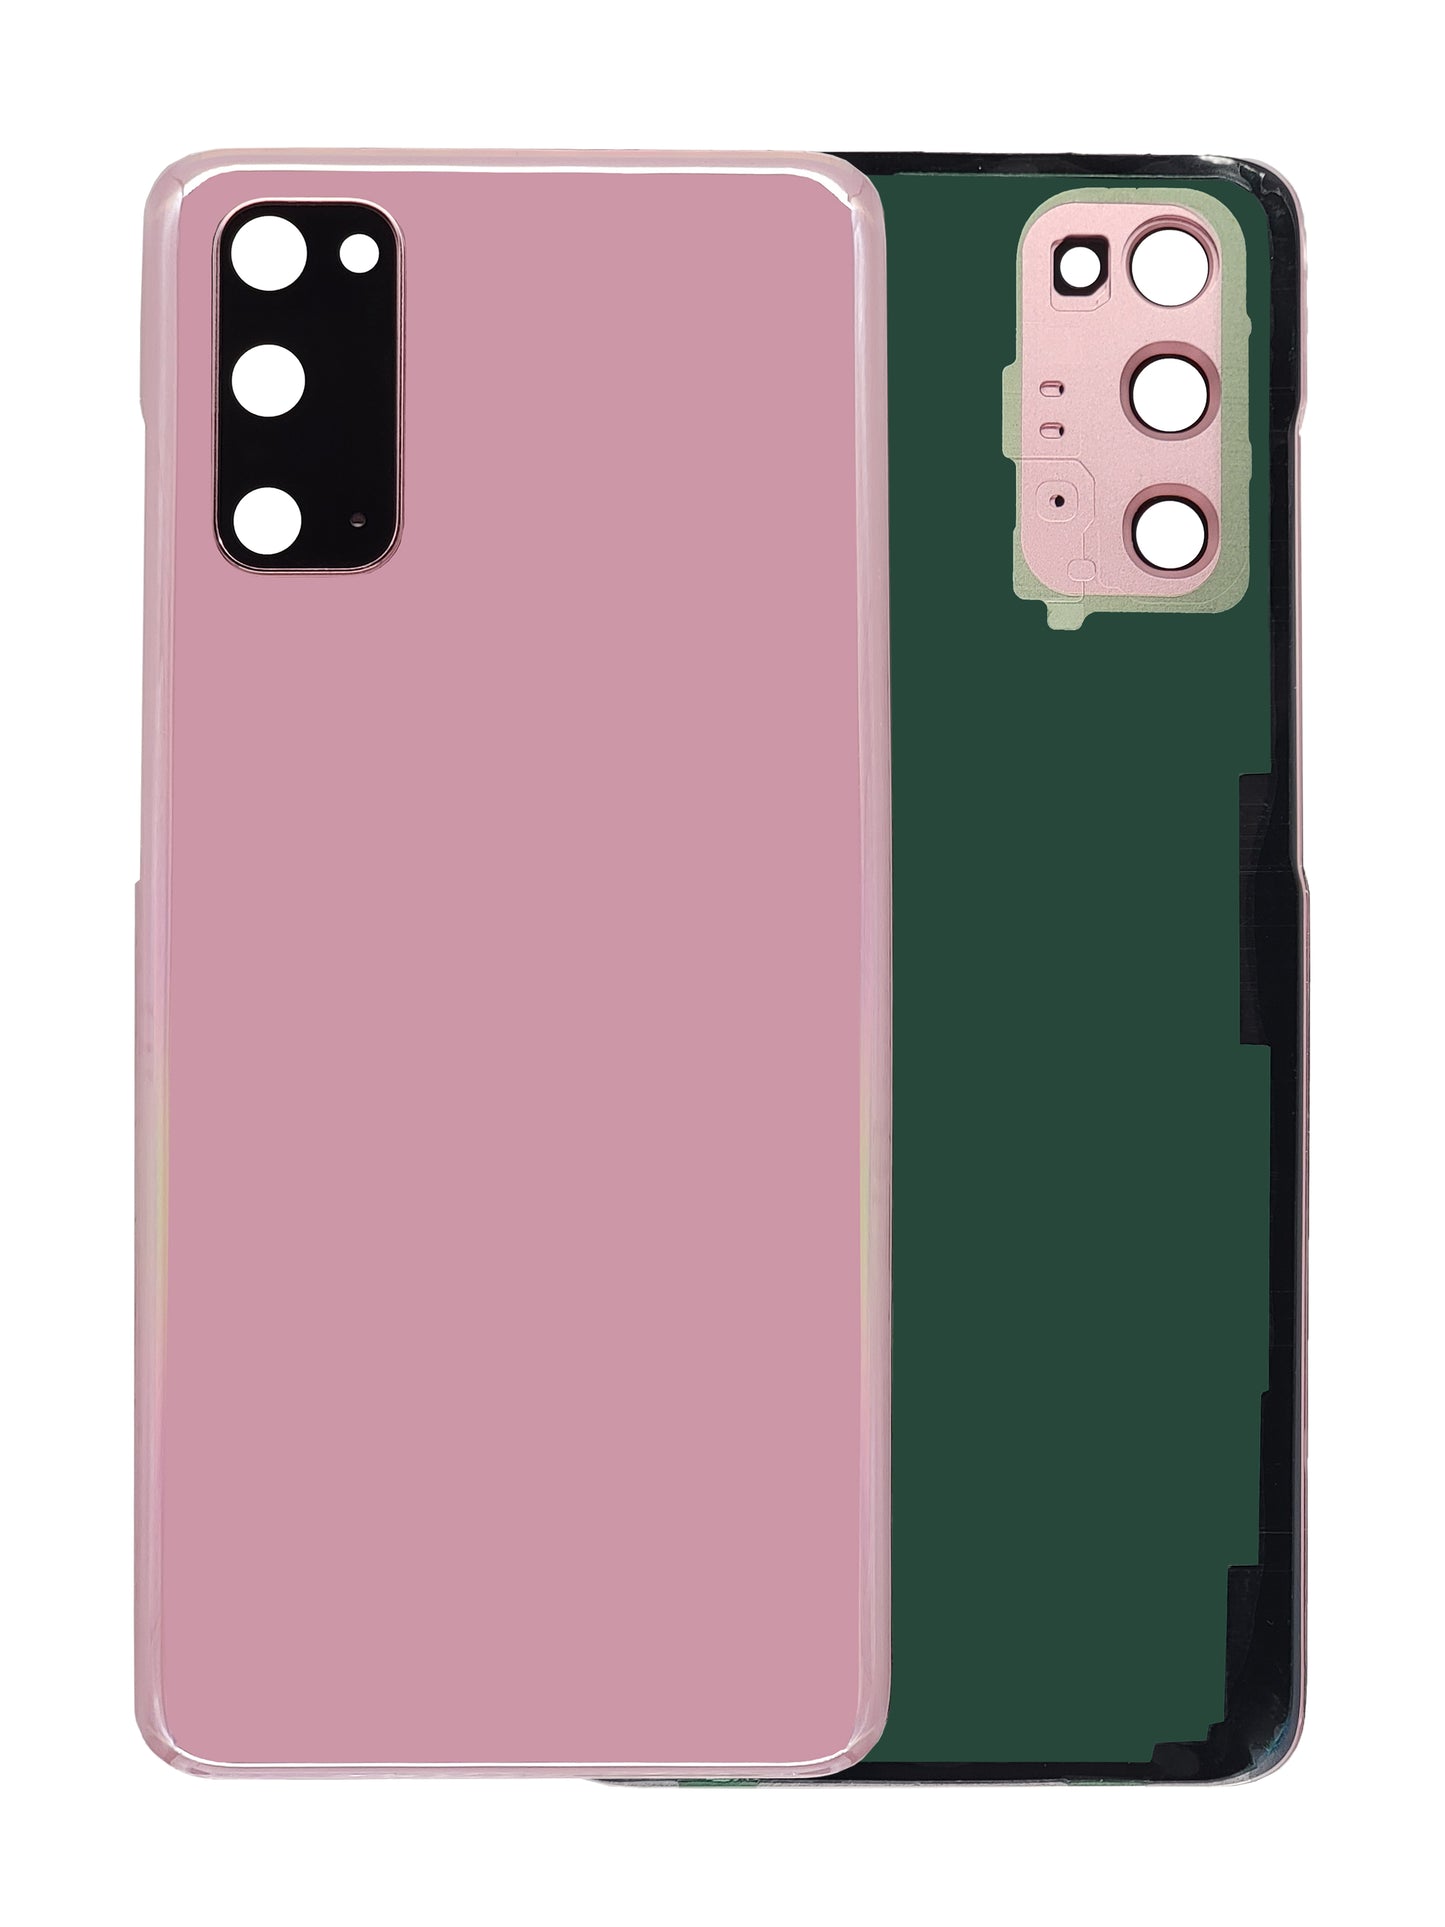 SGS S20 Back Cover (Pink)